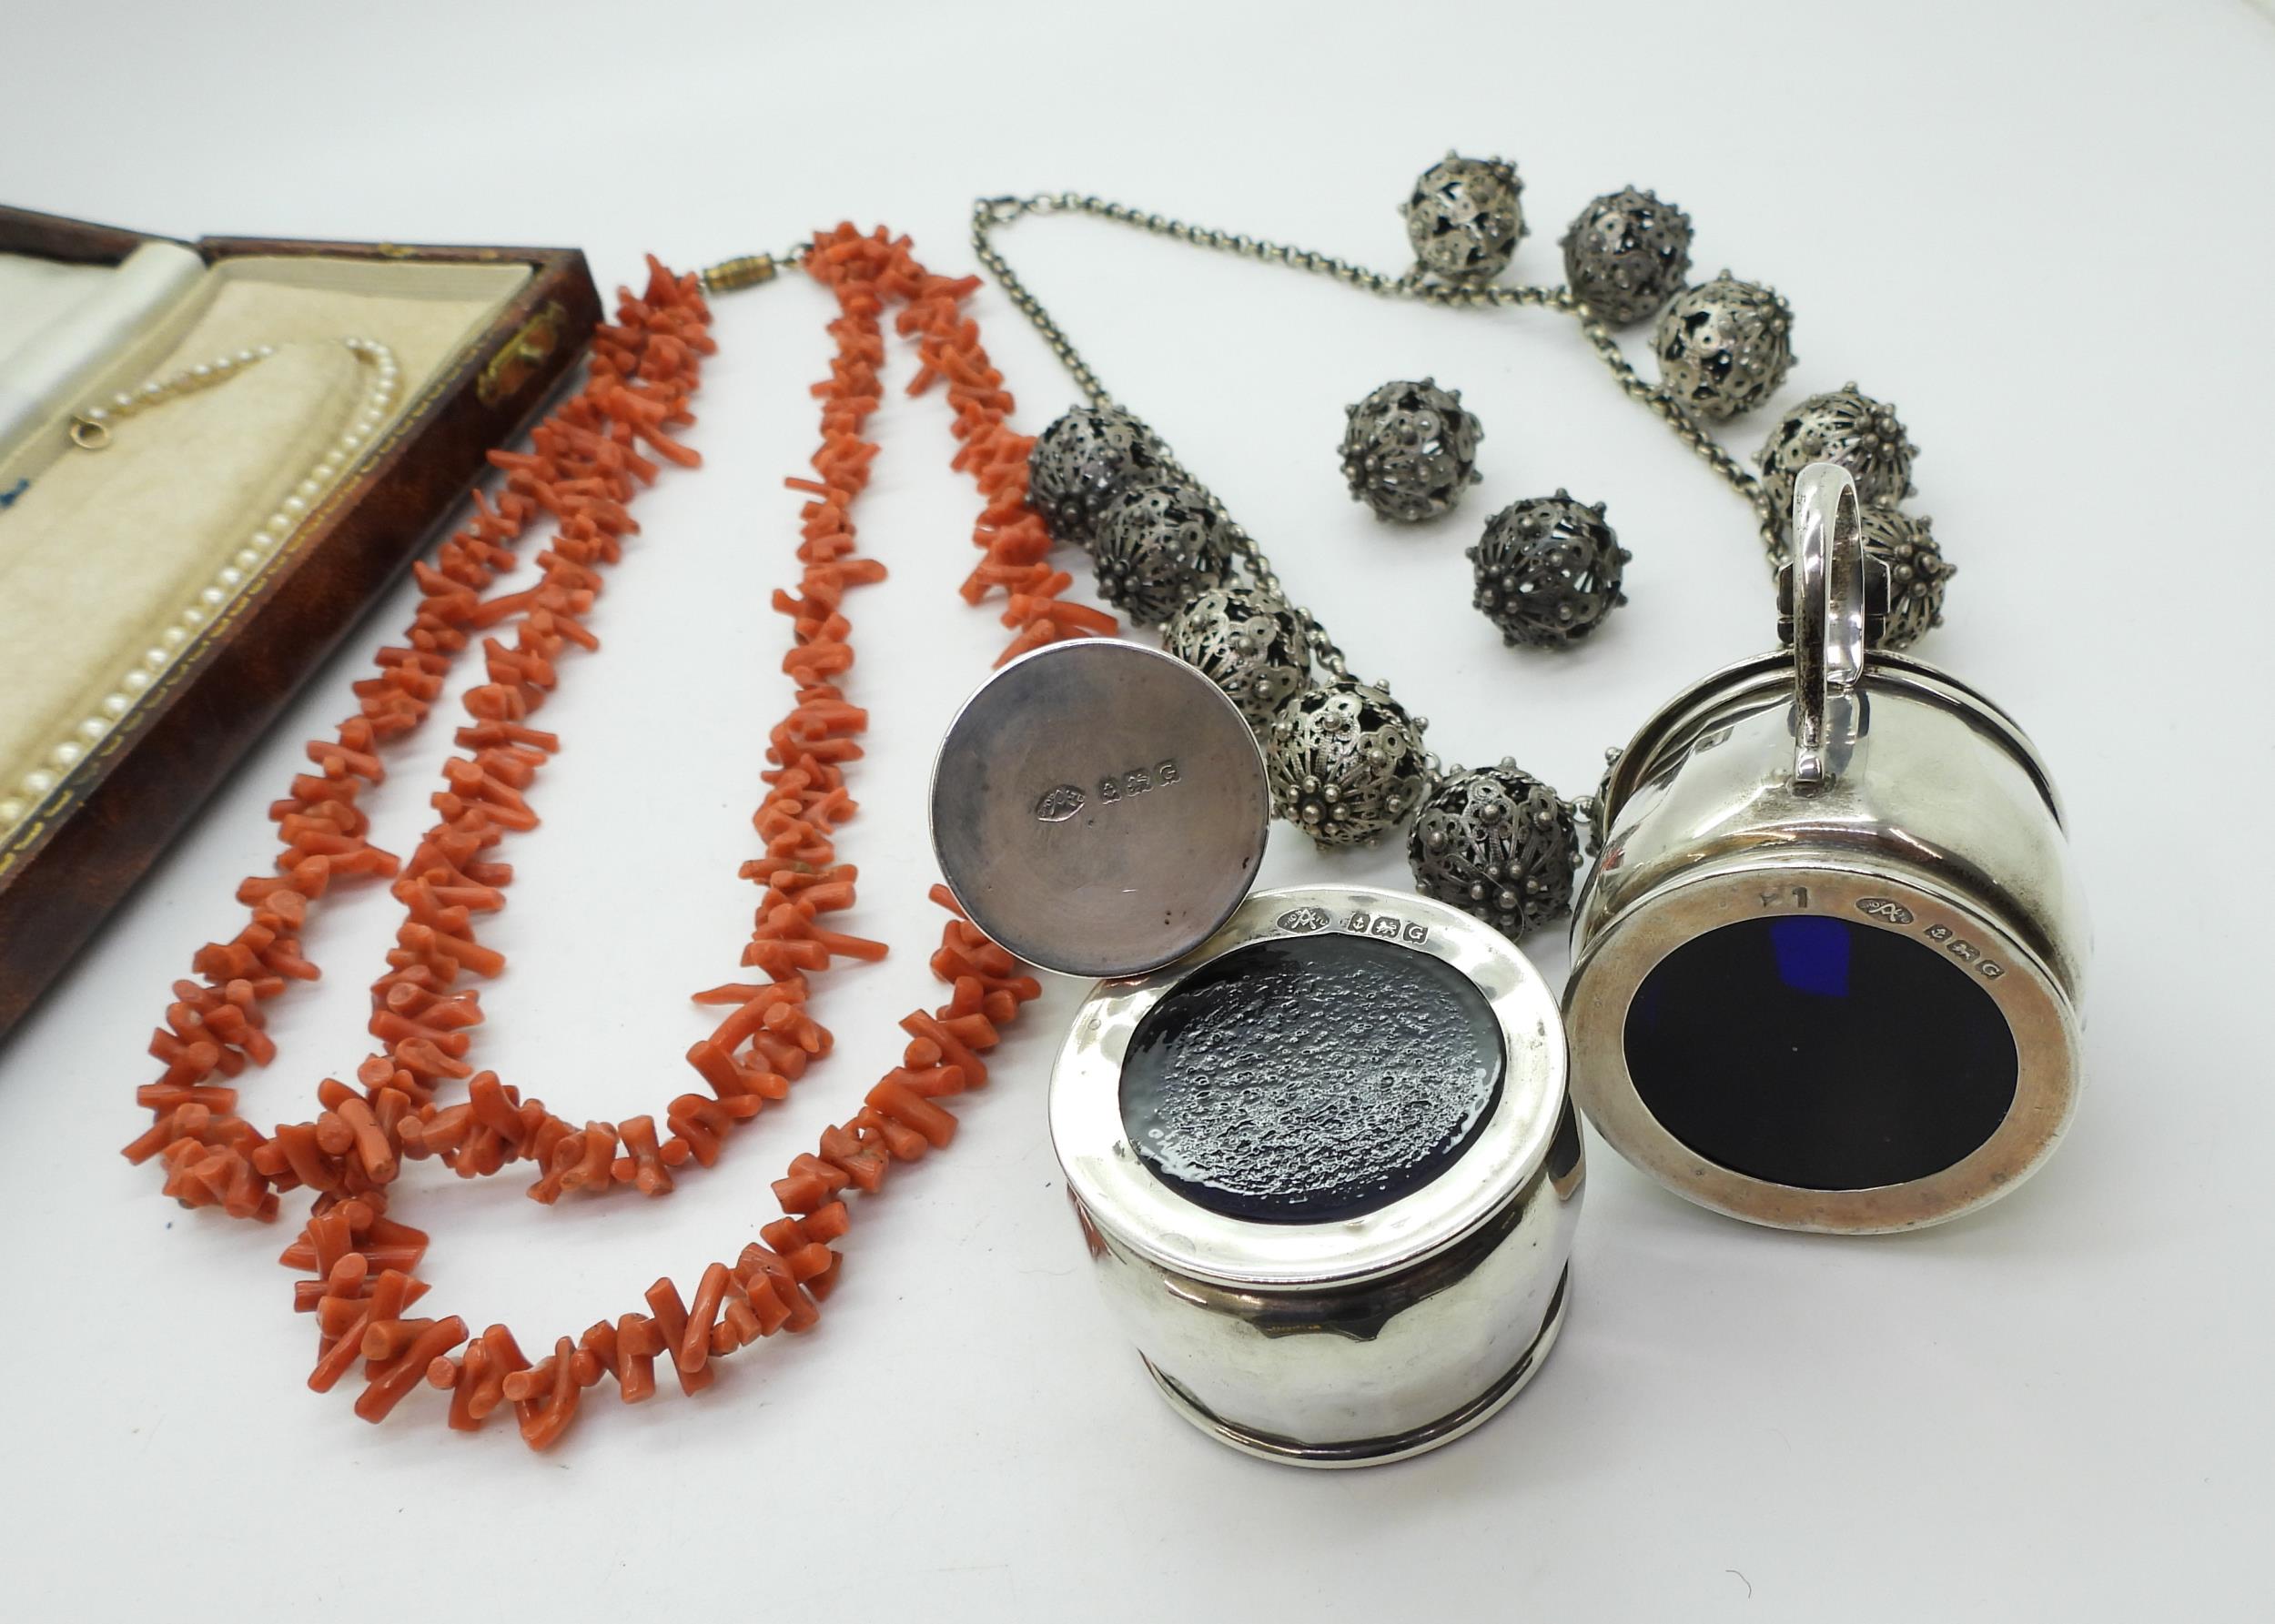 A coral fringe necklace, filigree ball necklace, Asprey & Co silver cruet set and other items - Image 3 of 3